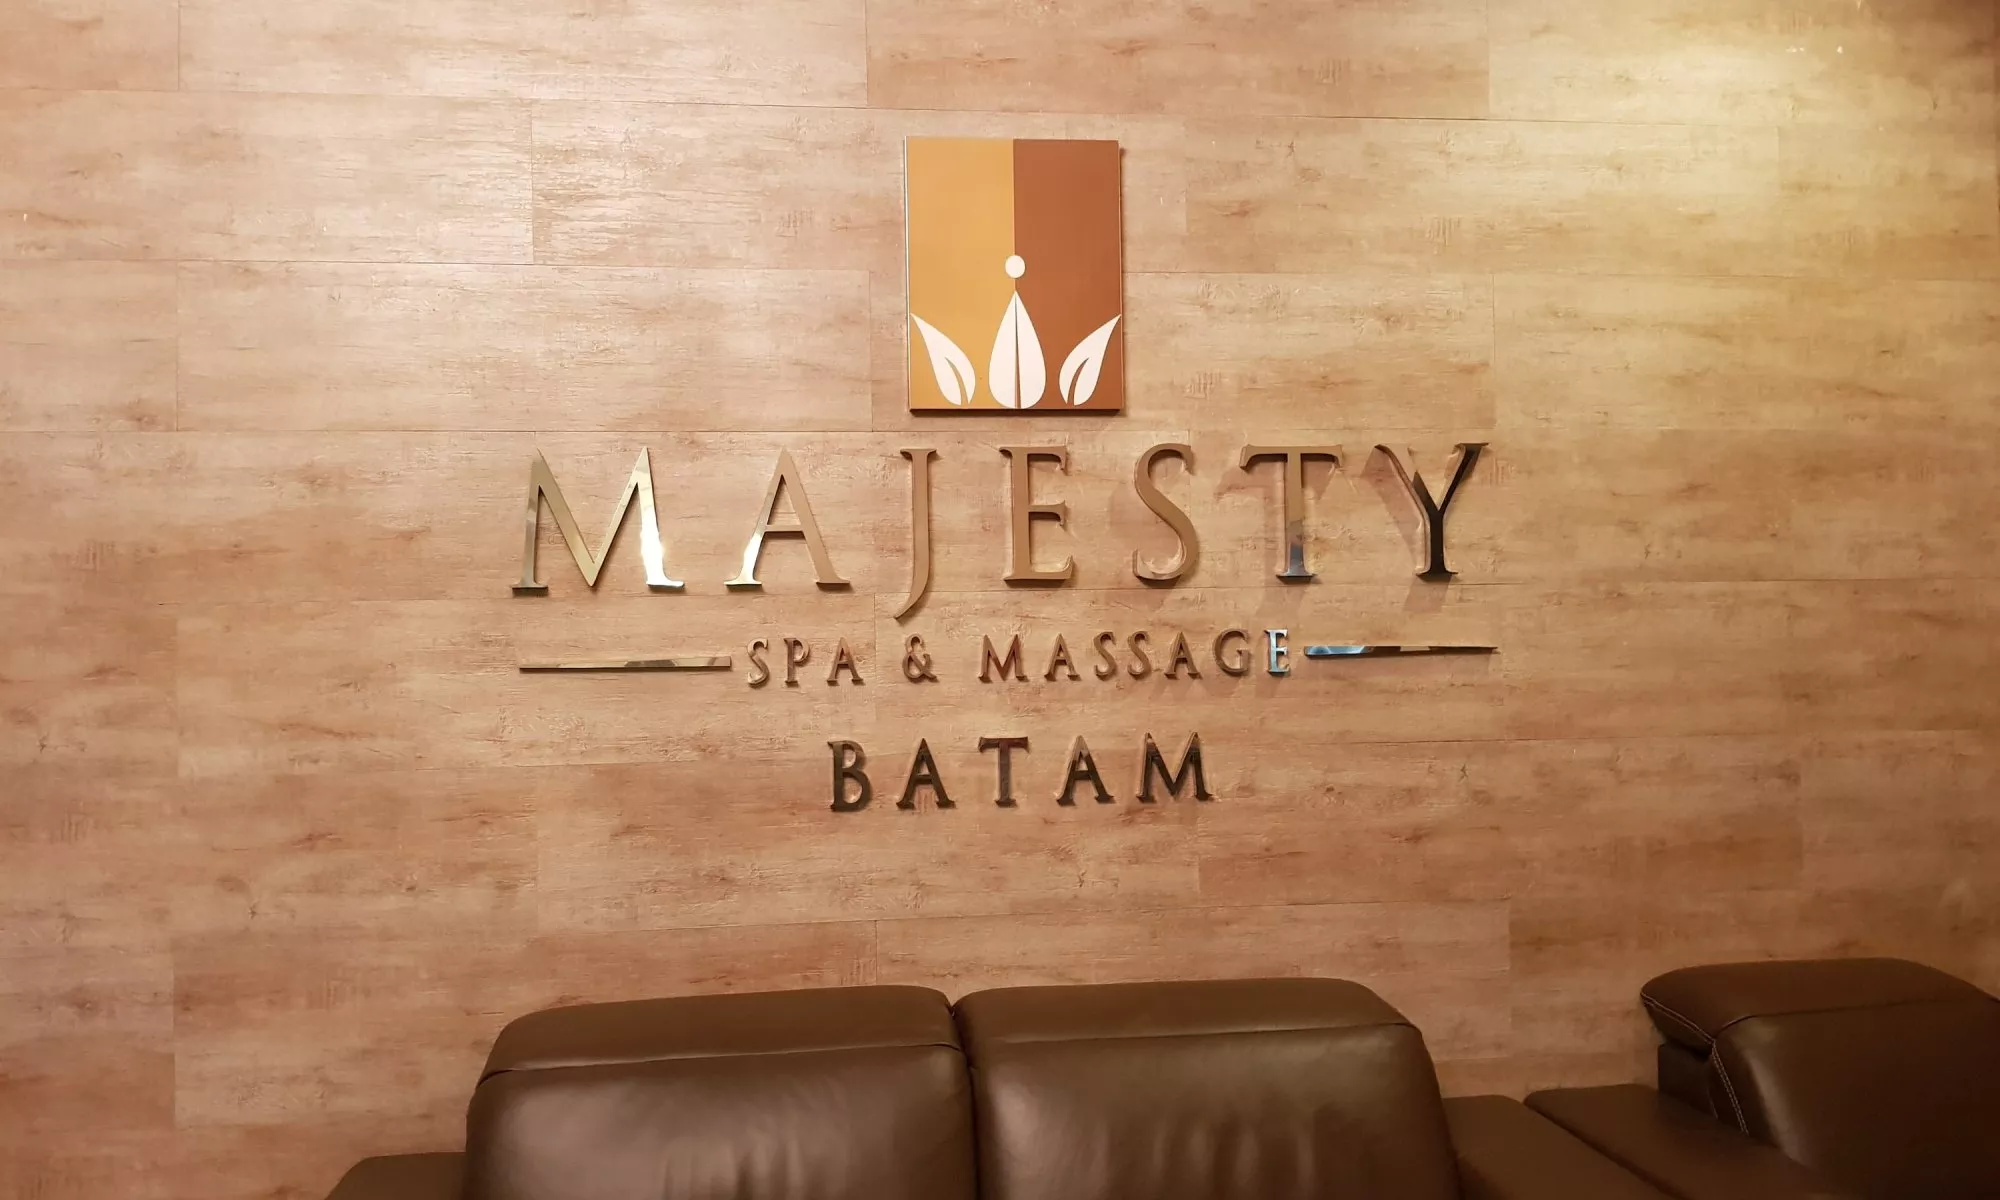 Majesty Spa & Massage Batam in Indonesia, Central Asia | SPAs,Massages - Rated 6